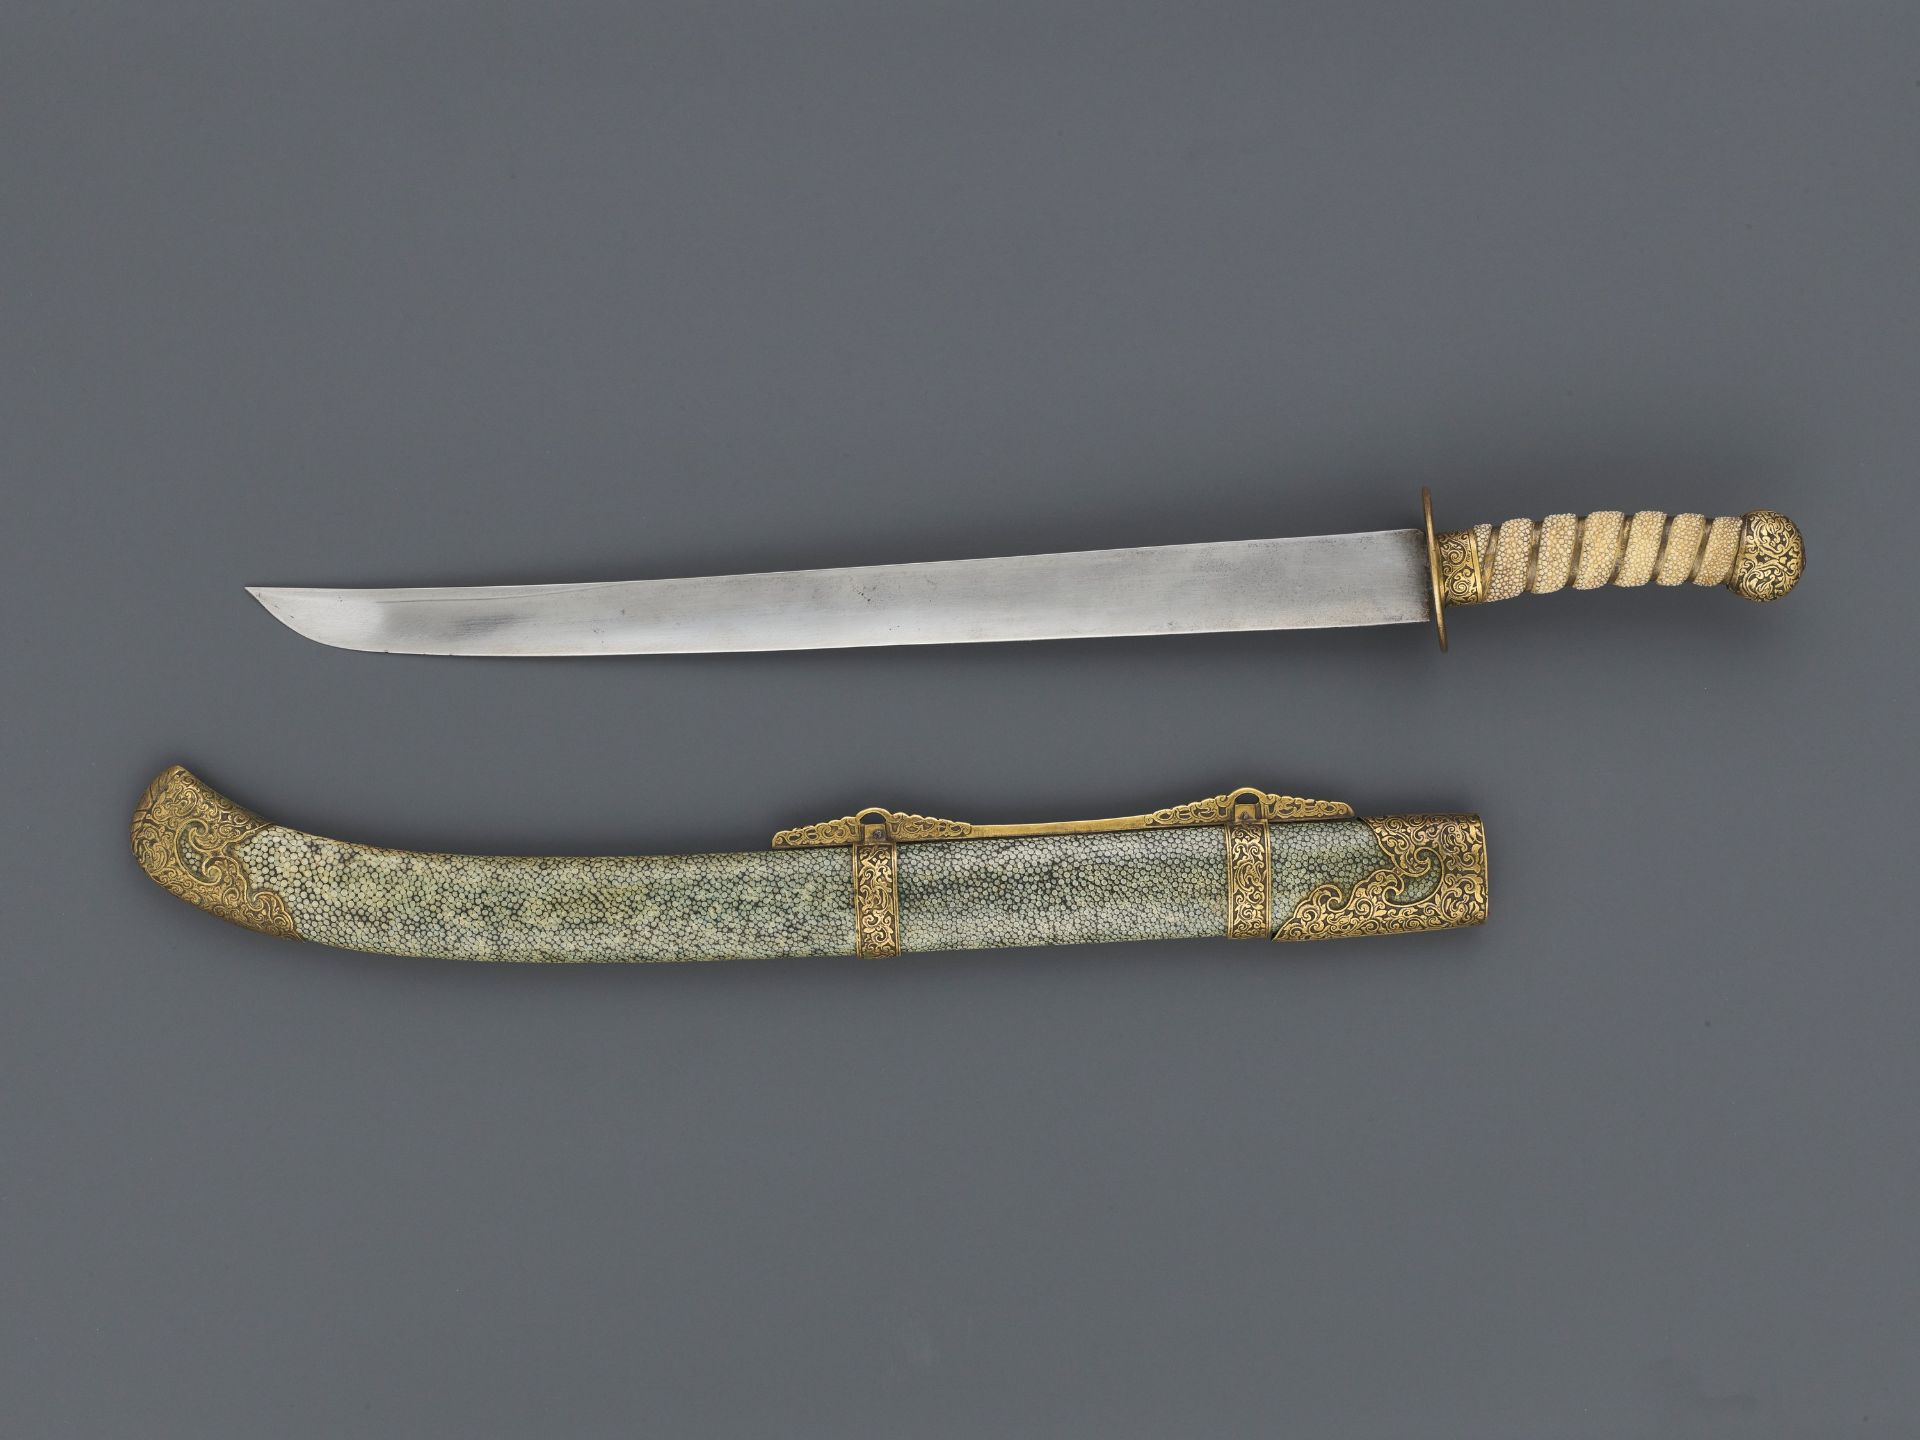 A CEREMONIAL SWORD AND SCABBARD, QING DYNASTY - Image 5 of 7